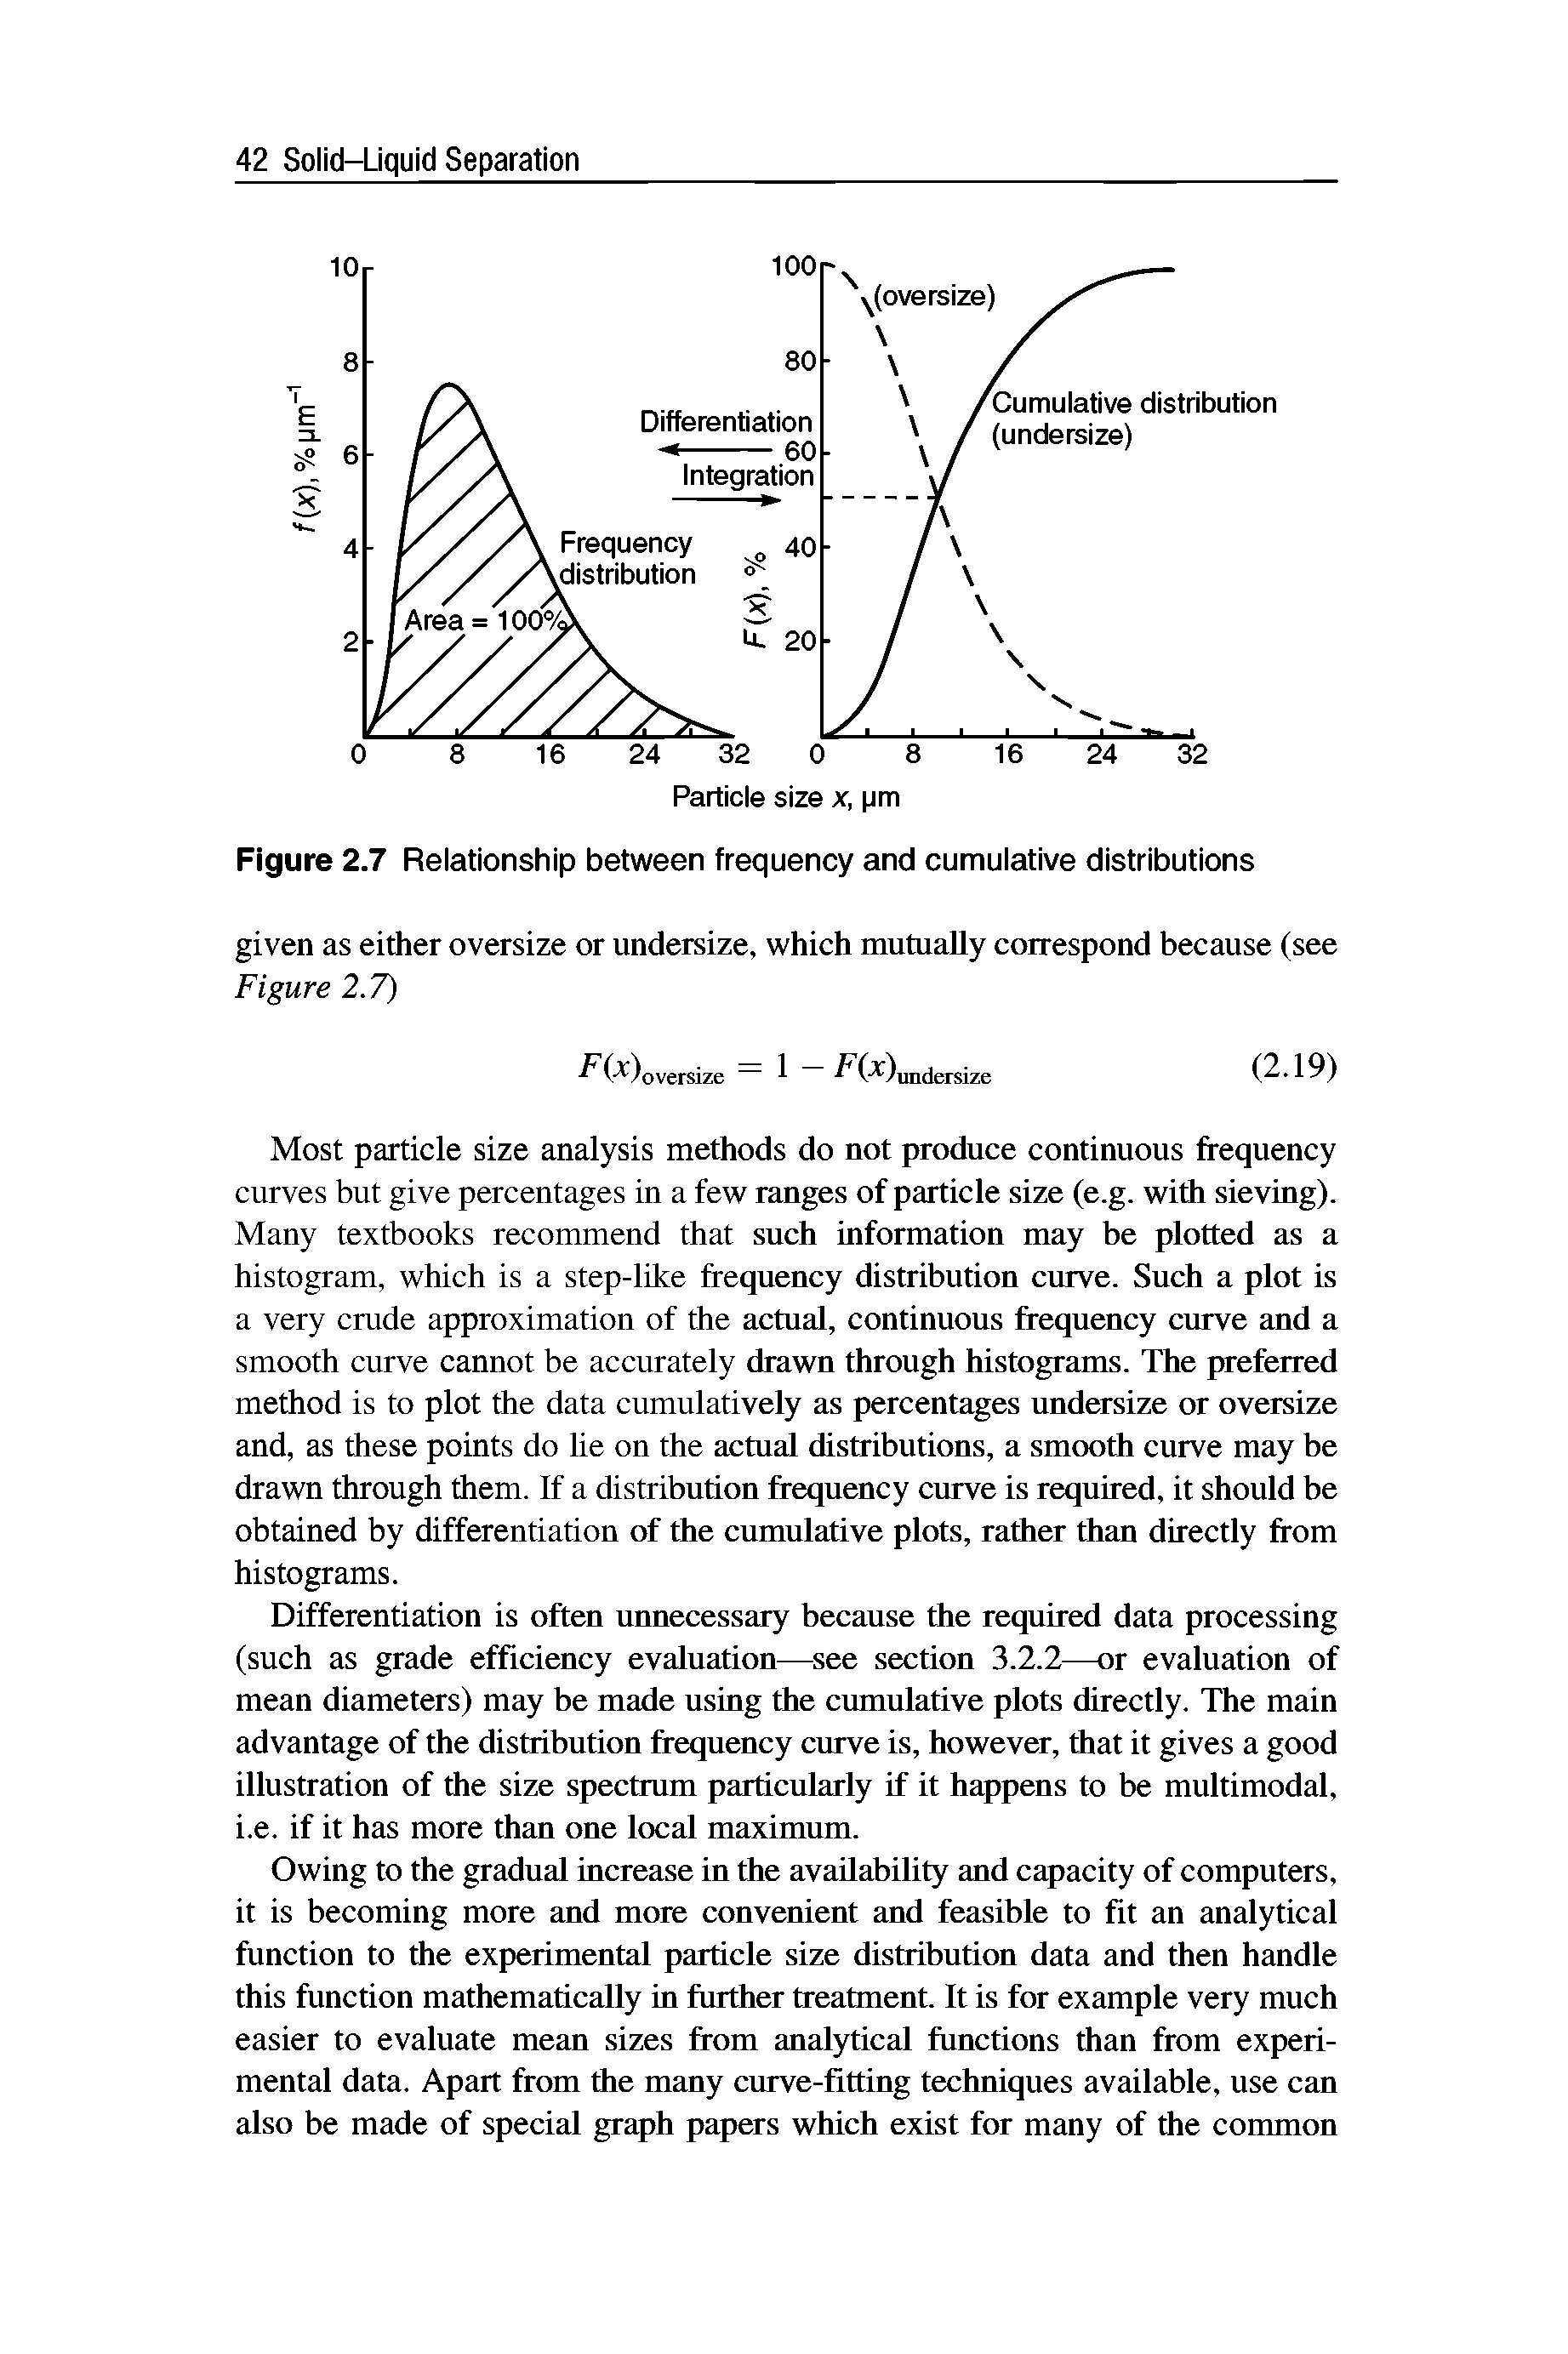 Figure 2.7 Relationship between frequency and cumulative distributions...